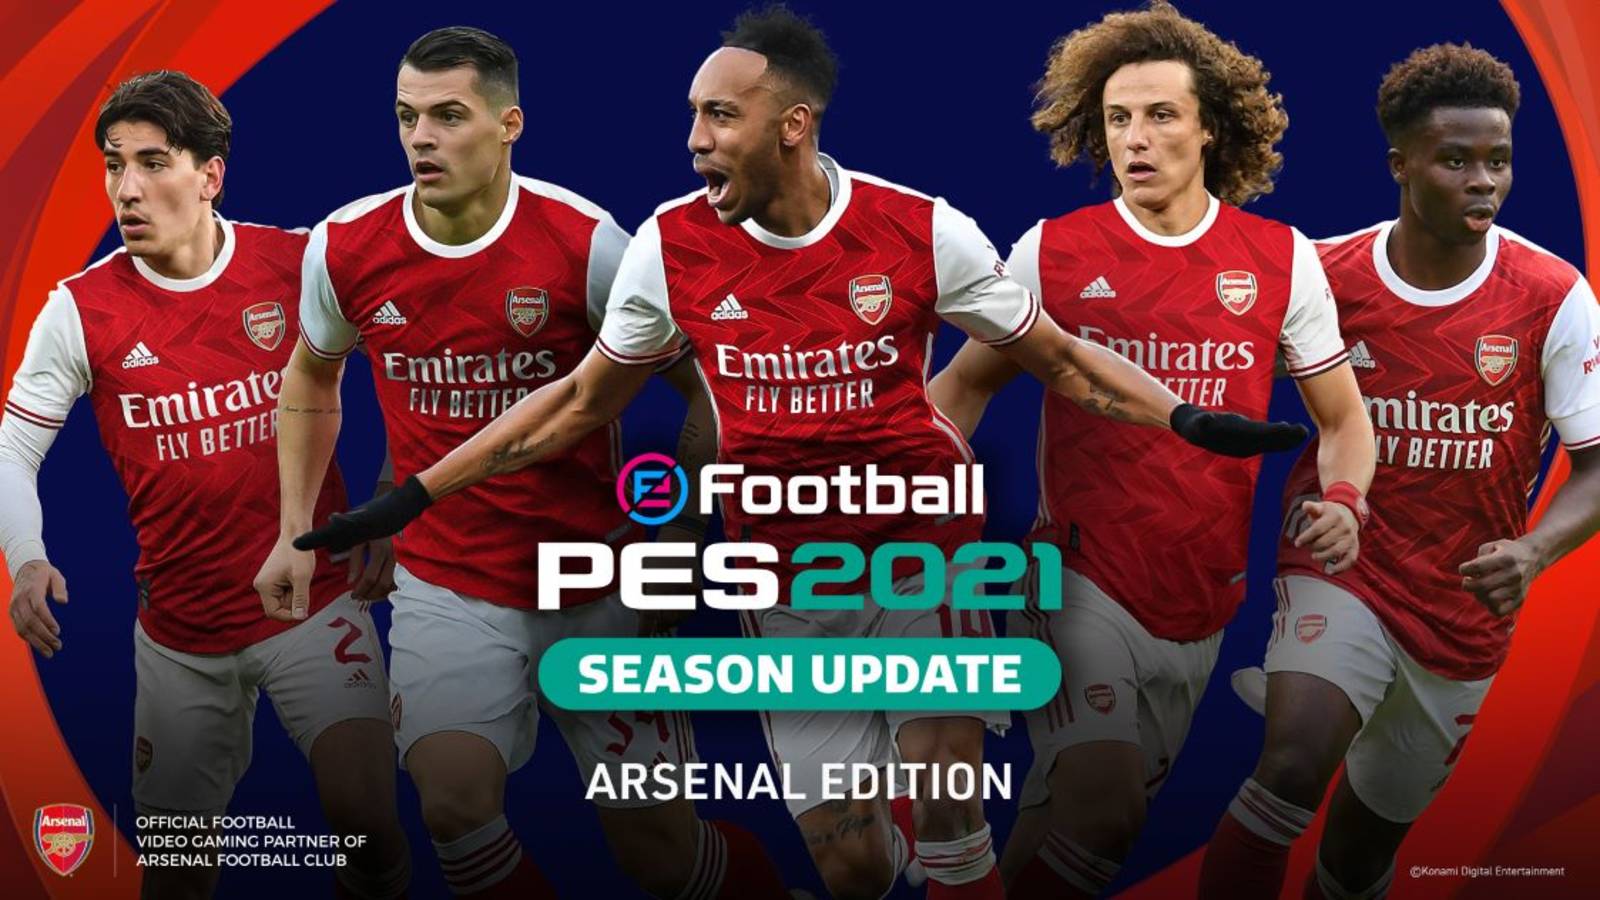 Global launch of eFootball PES 2021 MOBILE